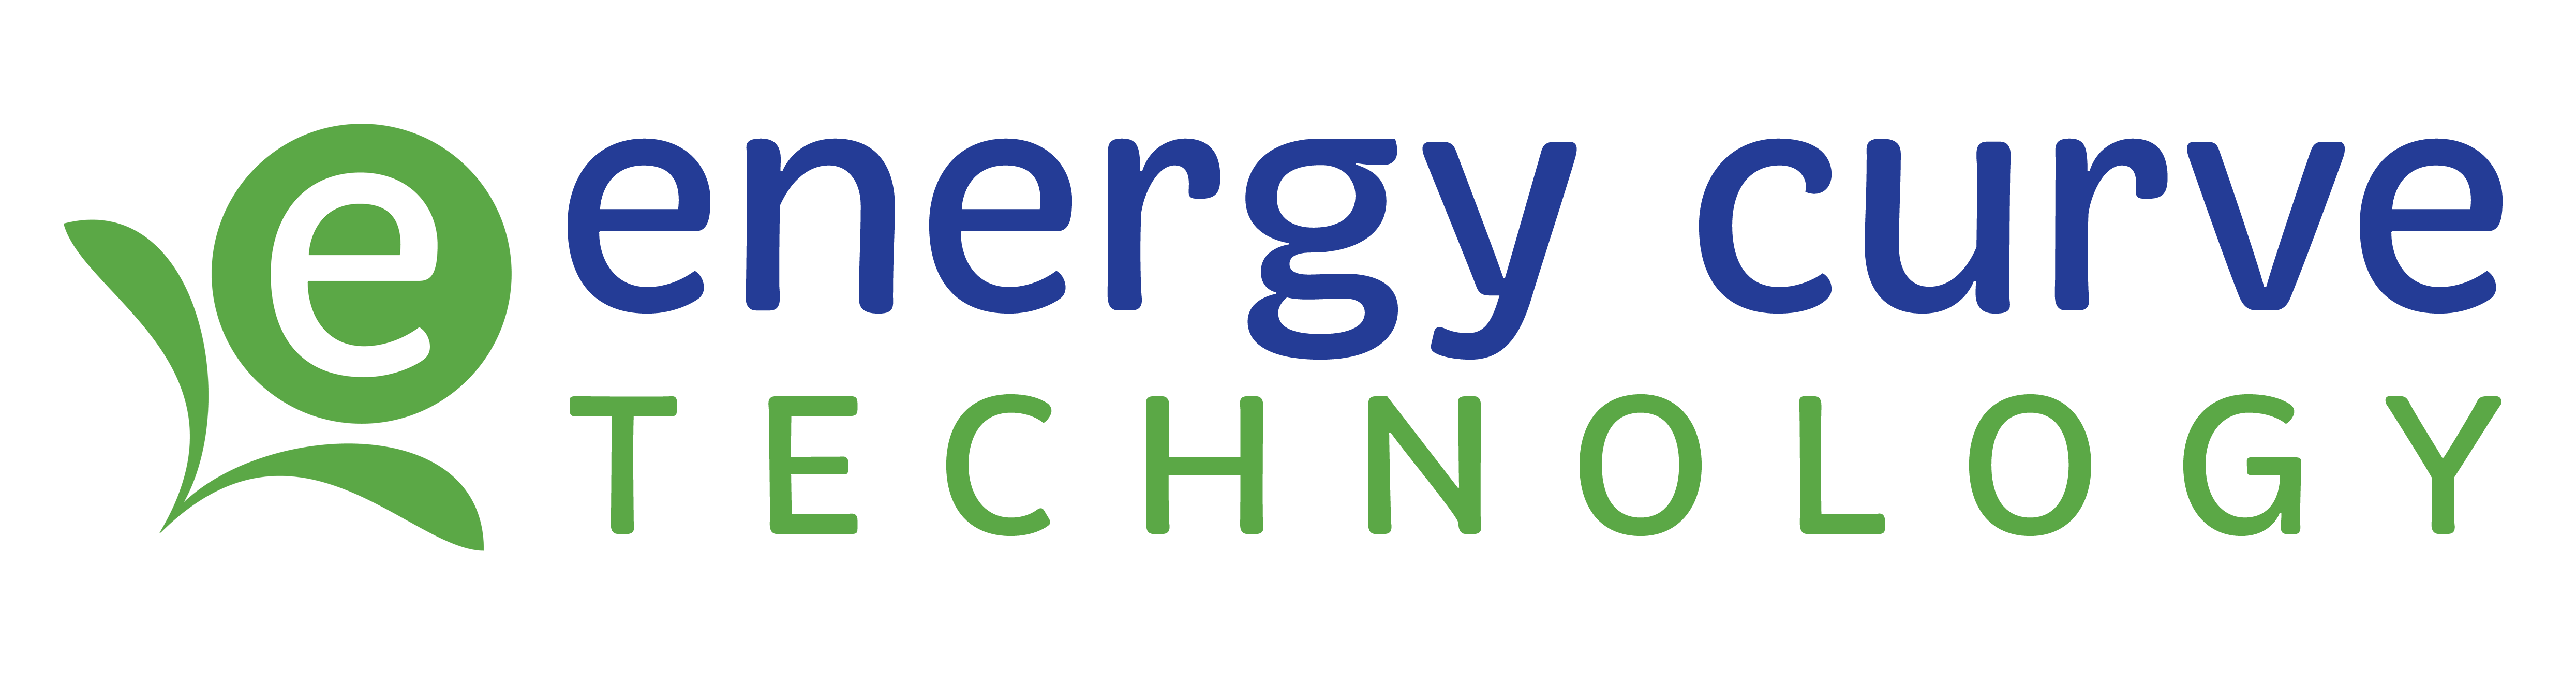 Energy Curve Technology logo in blue and green font.